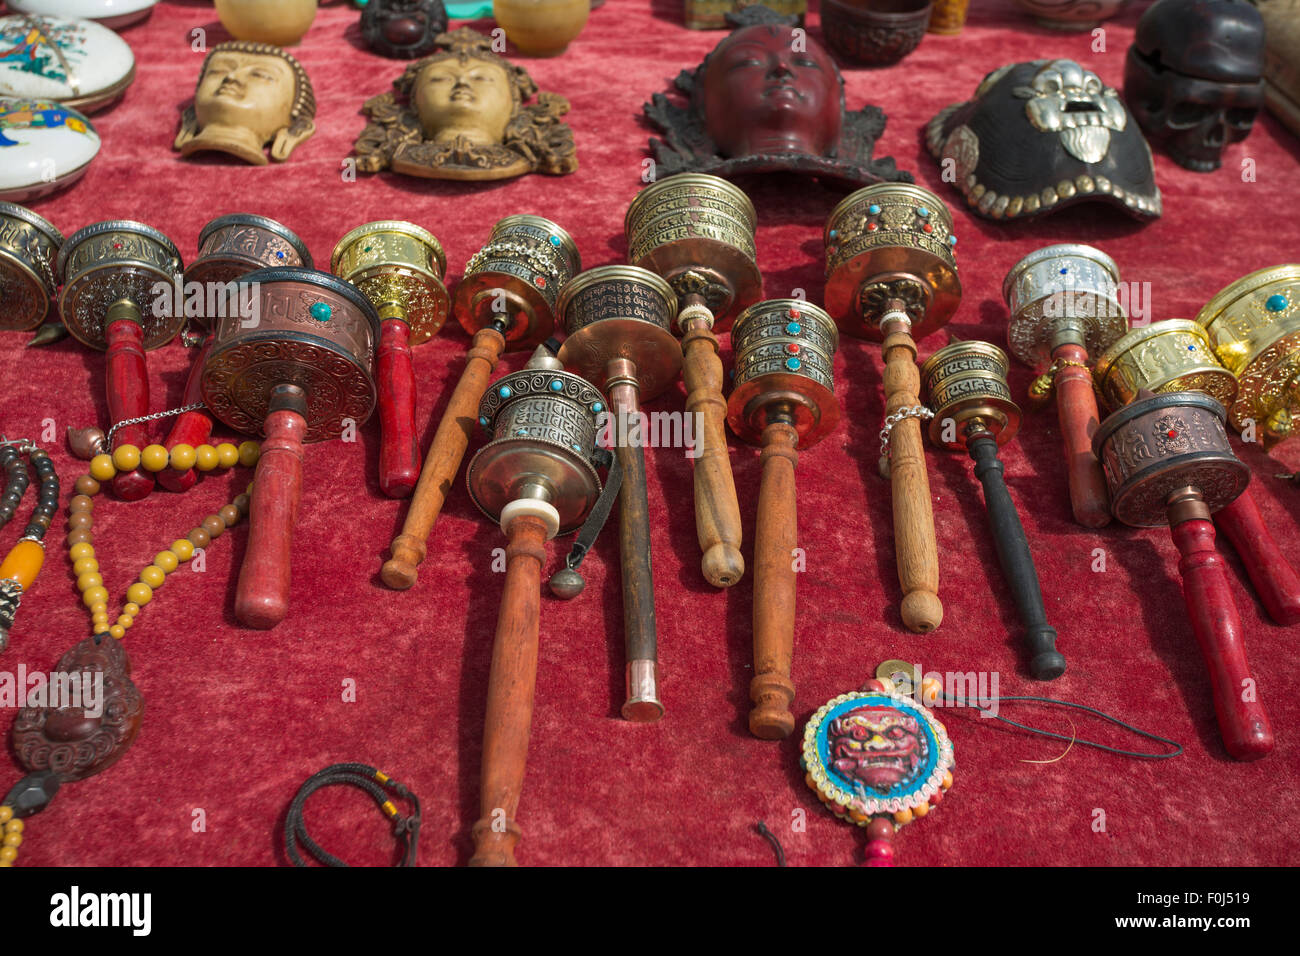 Buddhist prayer wheels for sale laying down on a red table in a market, Tibet, China 2013. Stock Photo